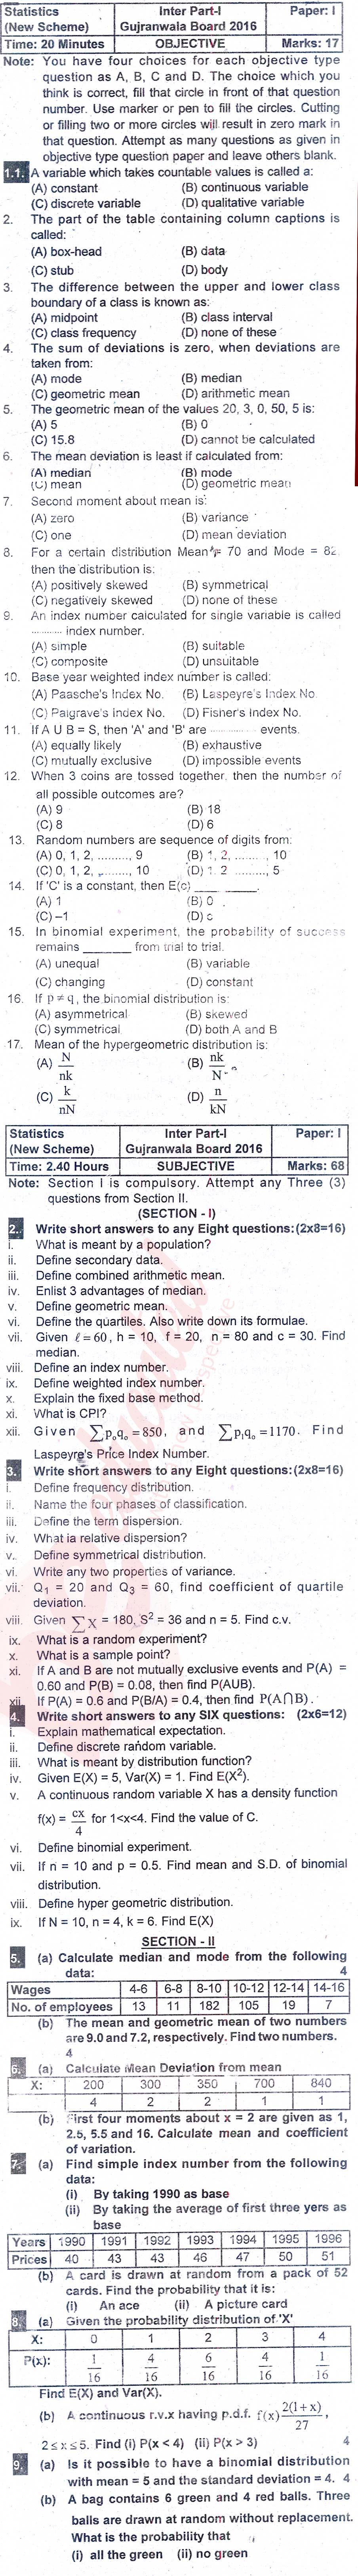 Statistics 11th class Past Paper Group 1 BISE Gujranwala 2016